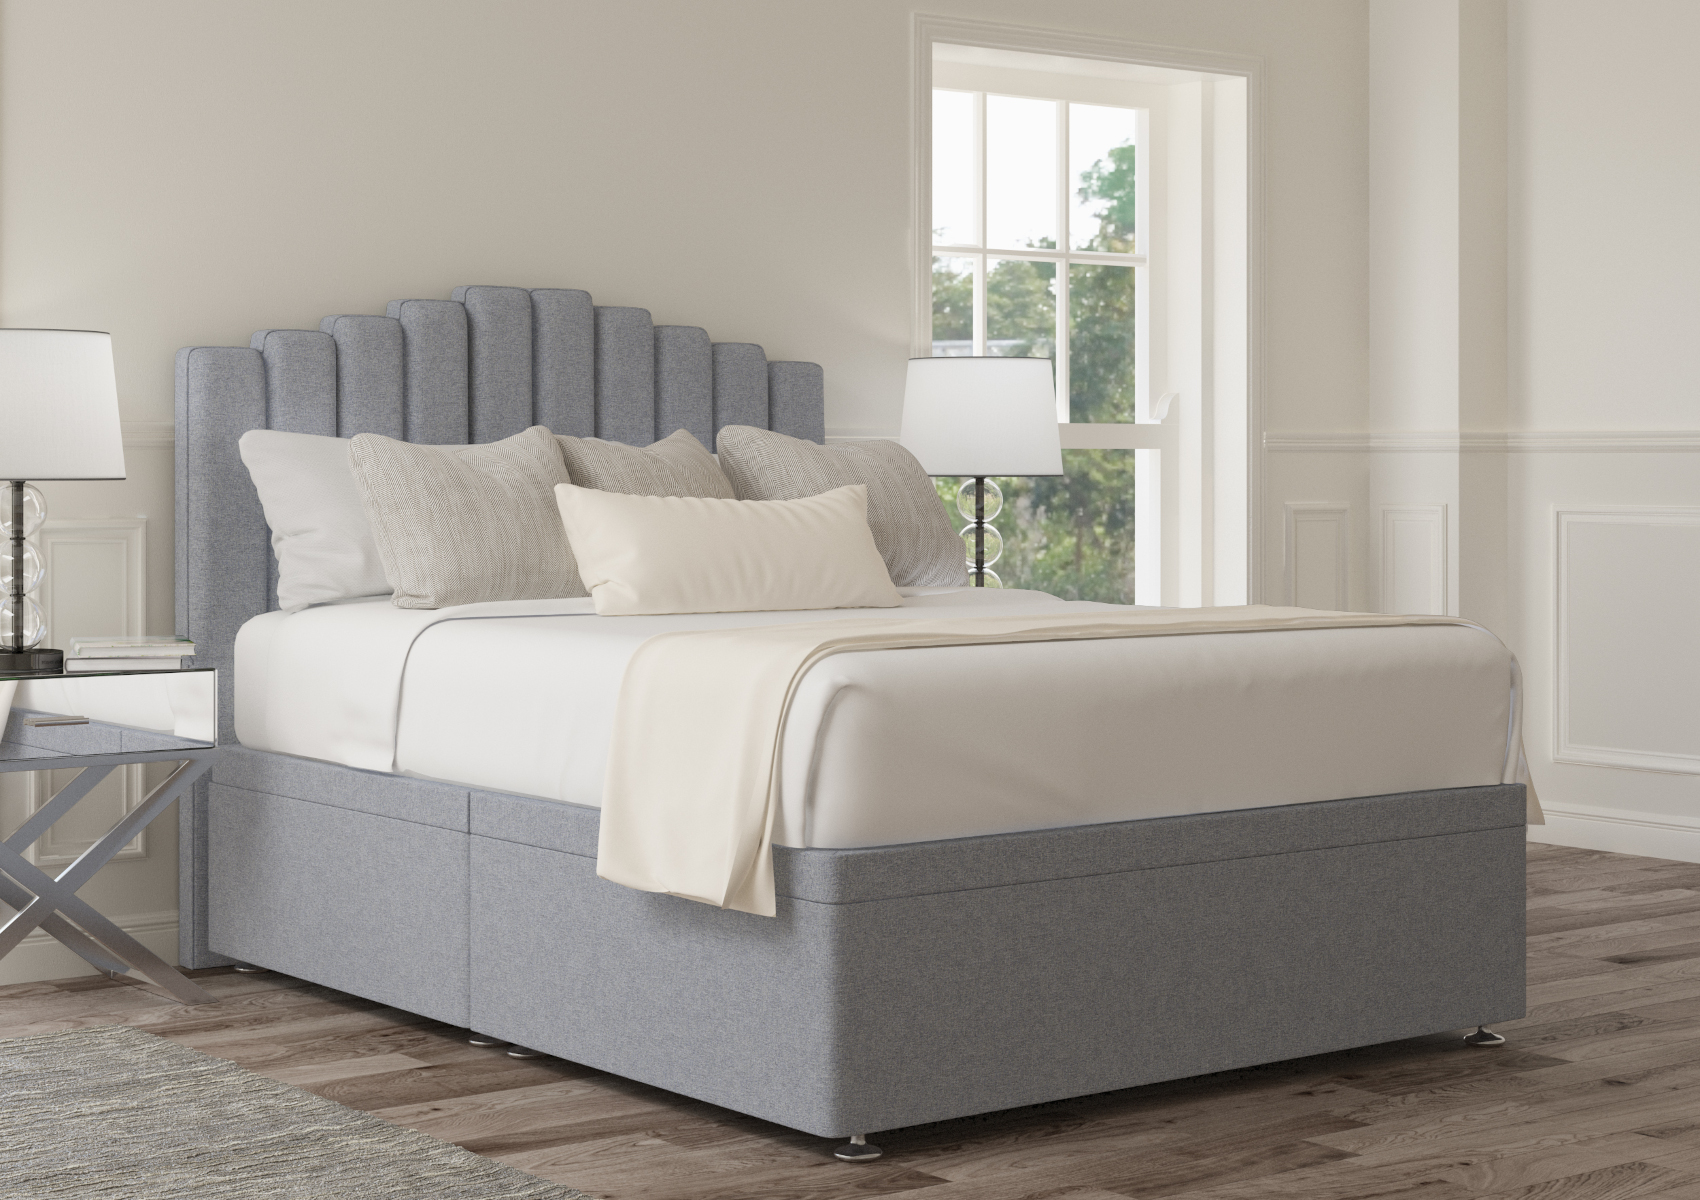 View Quinn Arran Natural Upholstered King Size Ottoman Bed Time4Sleep information